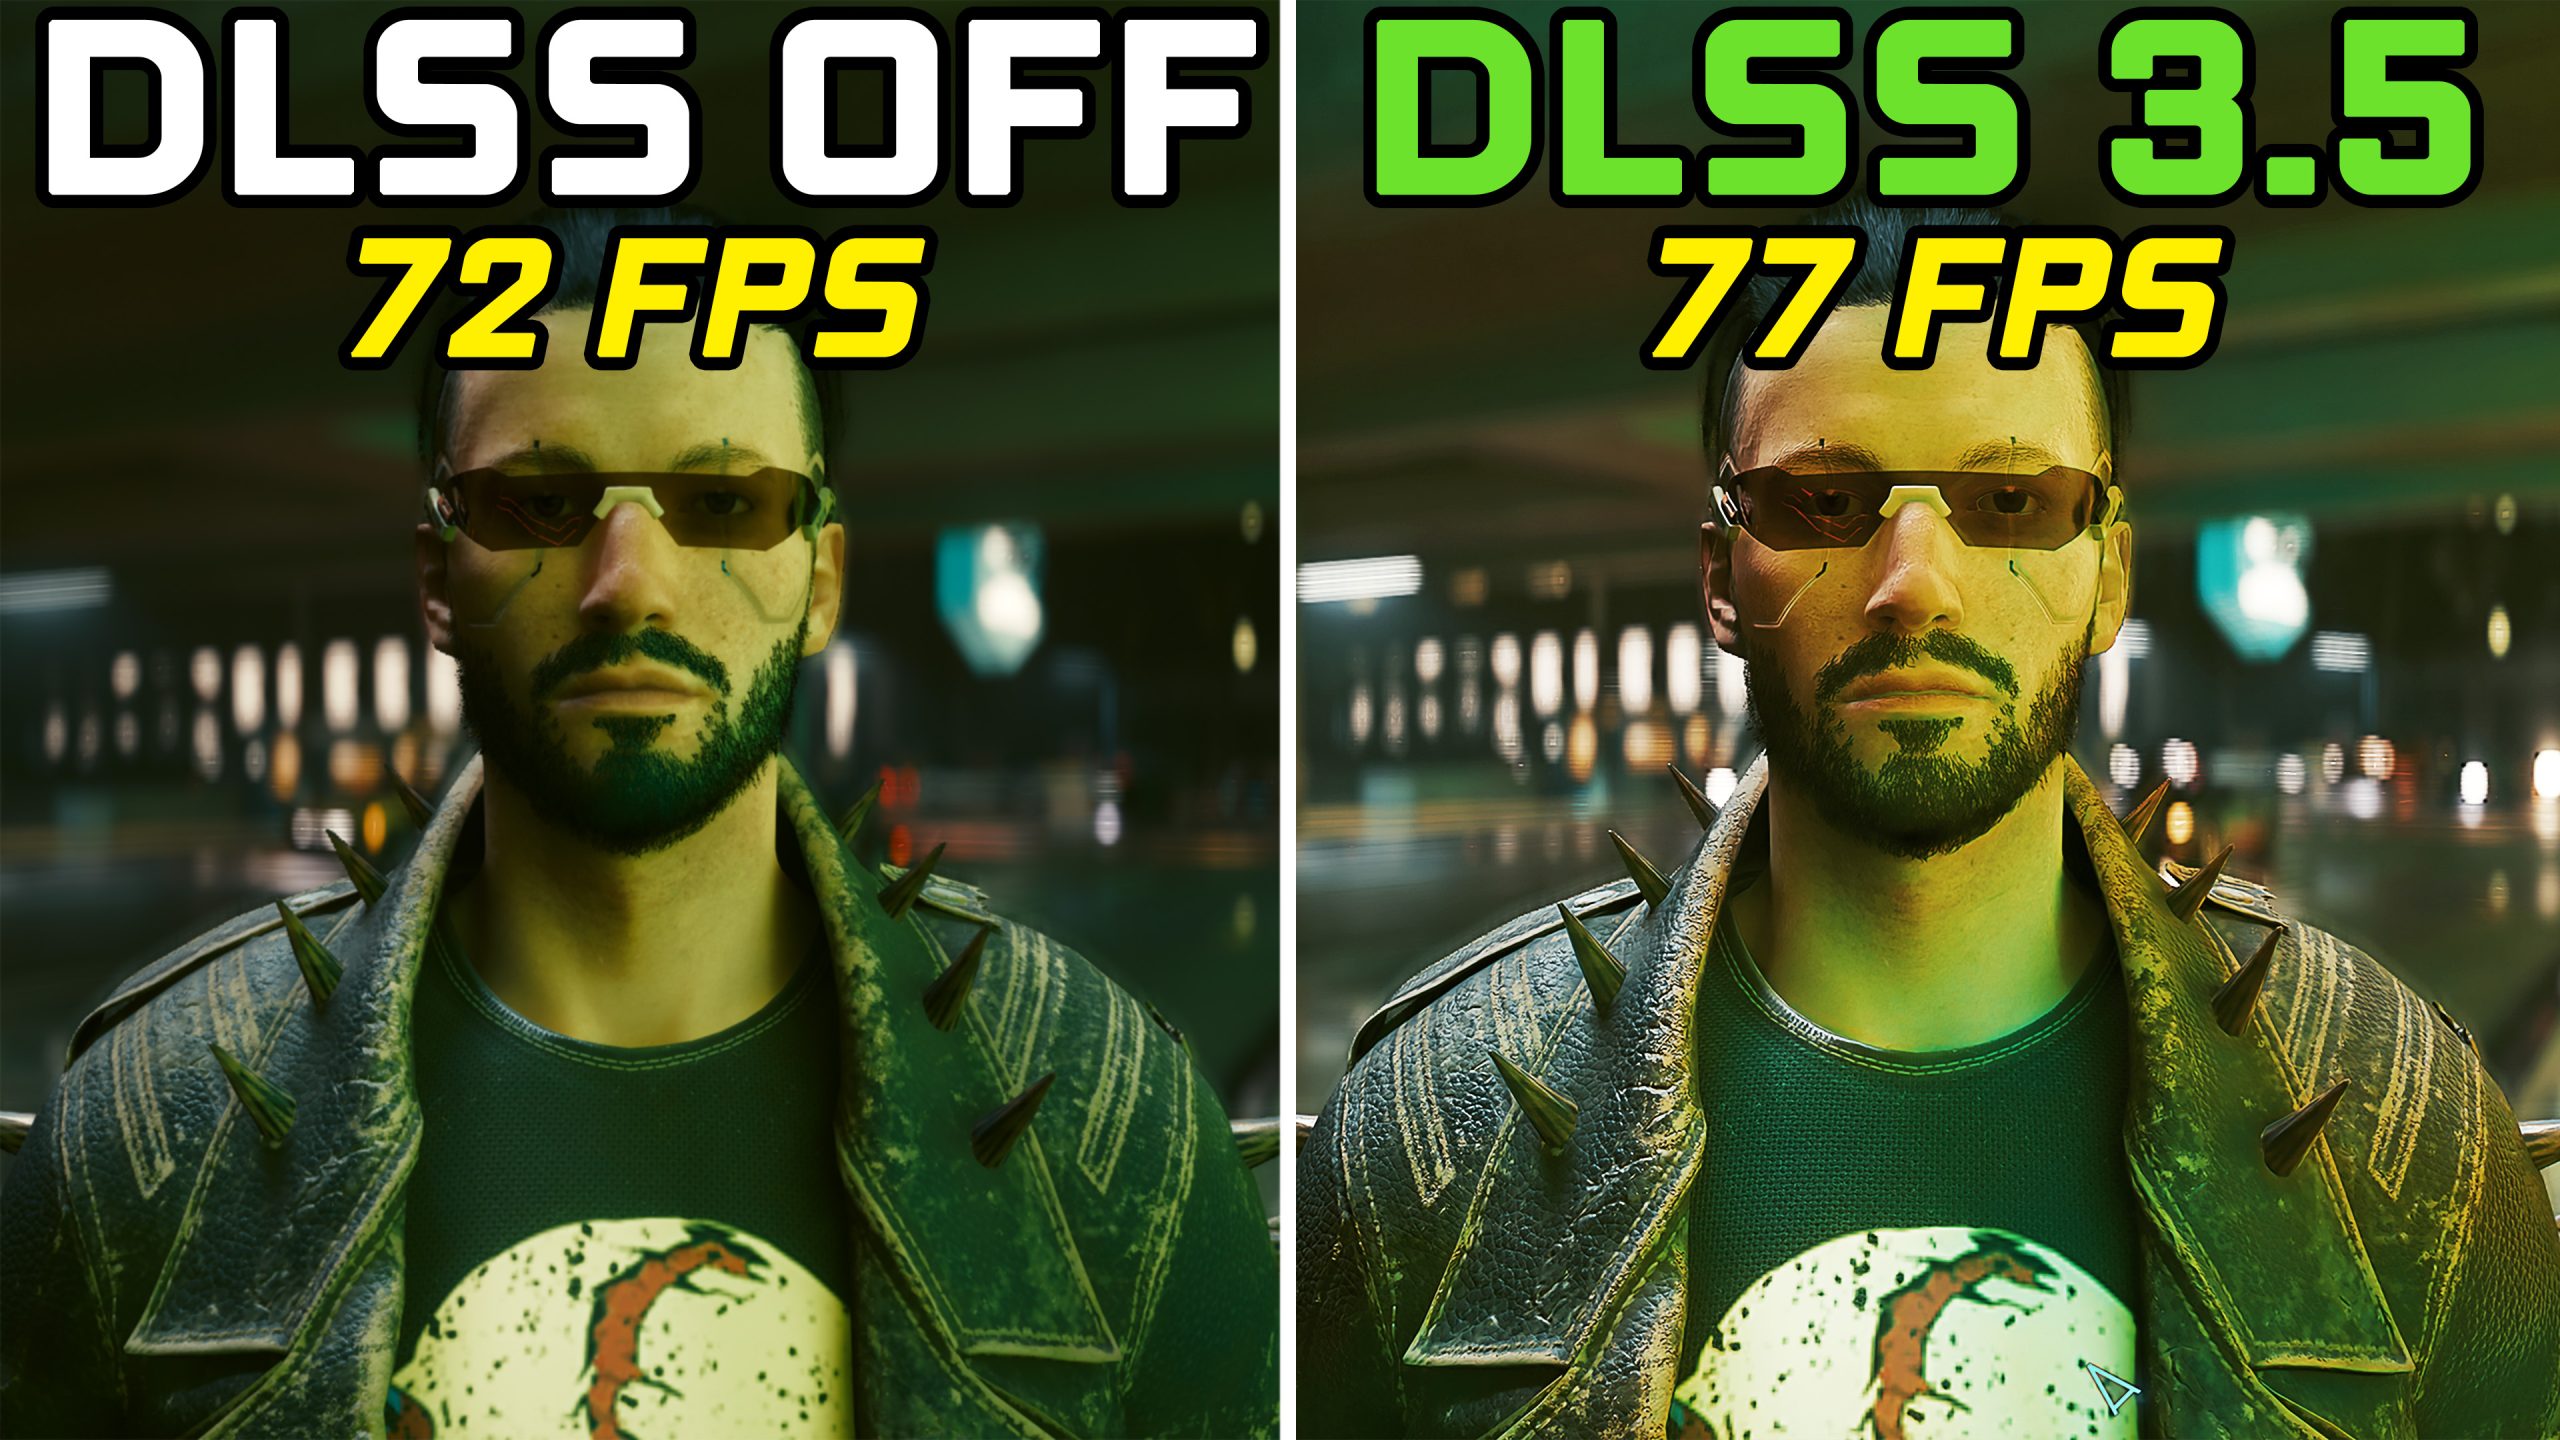 NVIDIA's DLSS 3.5 brings upgraded ray-tracing to Cyberpunk 2077 this week